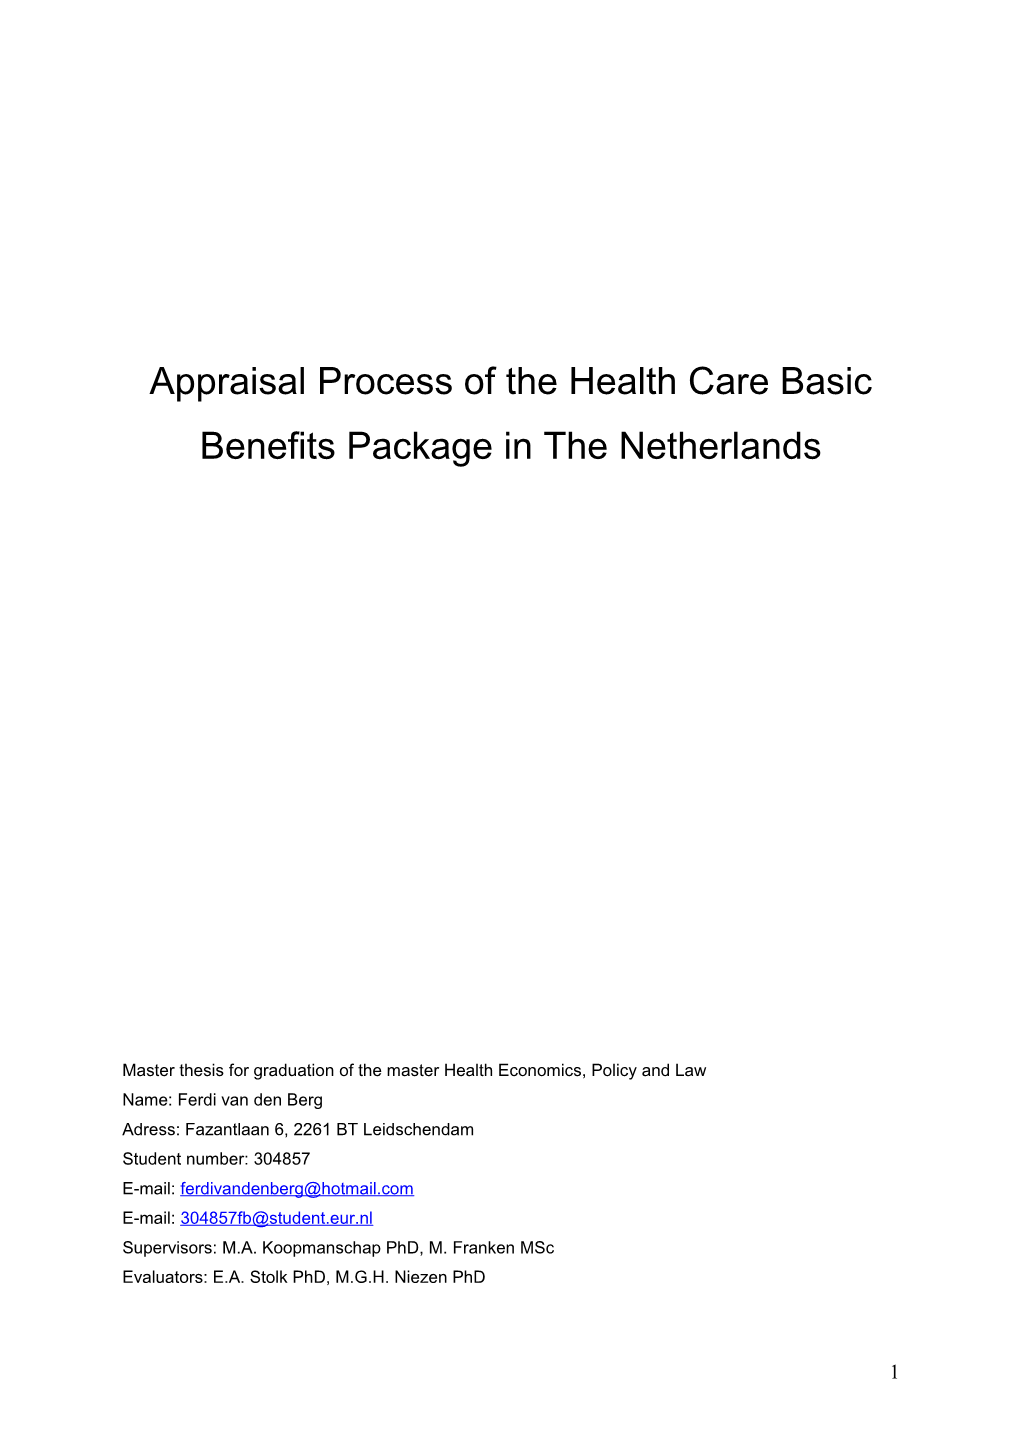 Appraisal Process of the Health Care Basic Benefit Package in the Netherlands